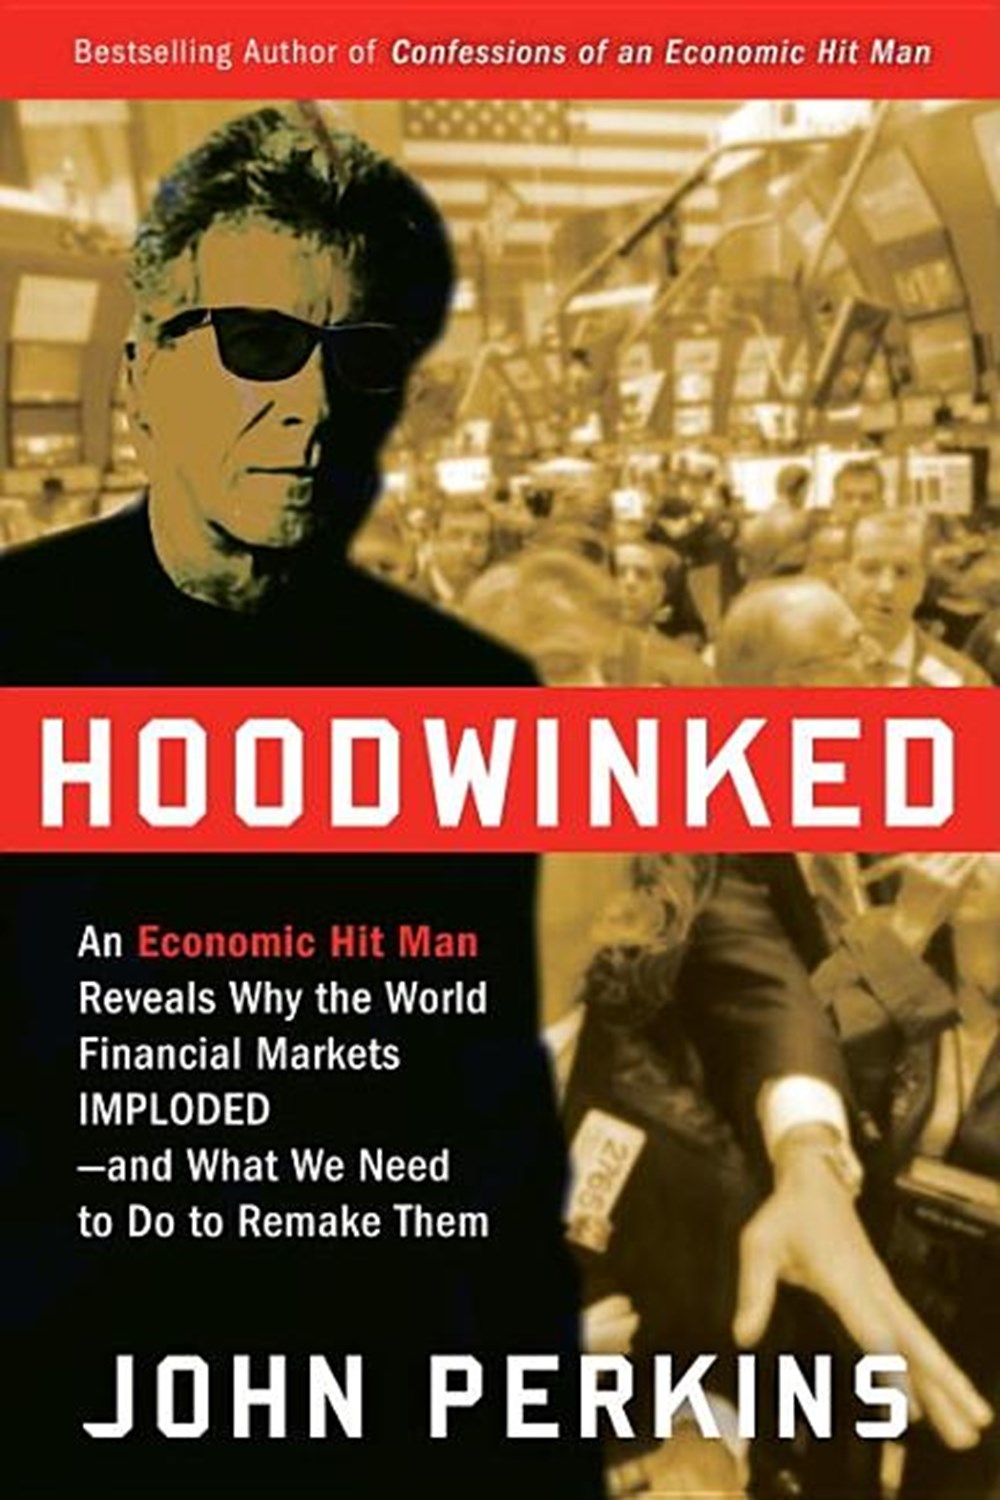 Hoodwinked An Economic Hit Man Reveals Why the World Financial Markets Imploded--And What We Need to